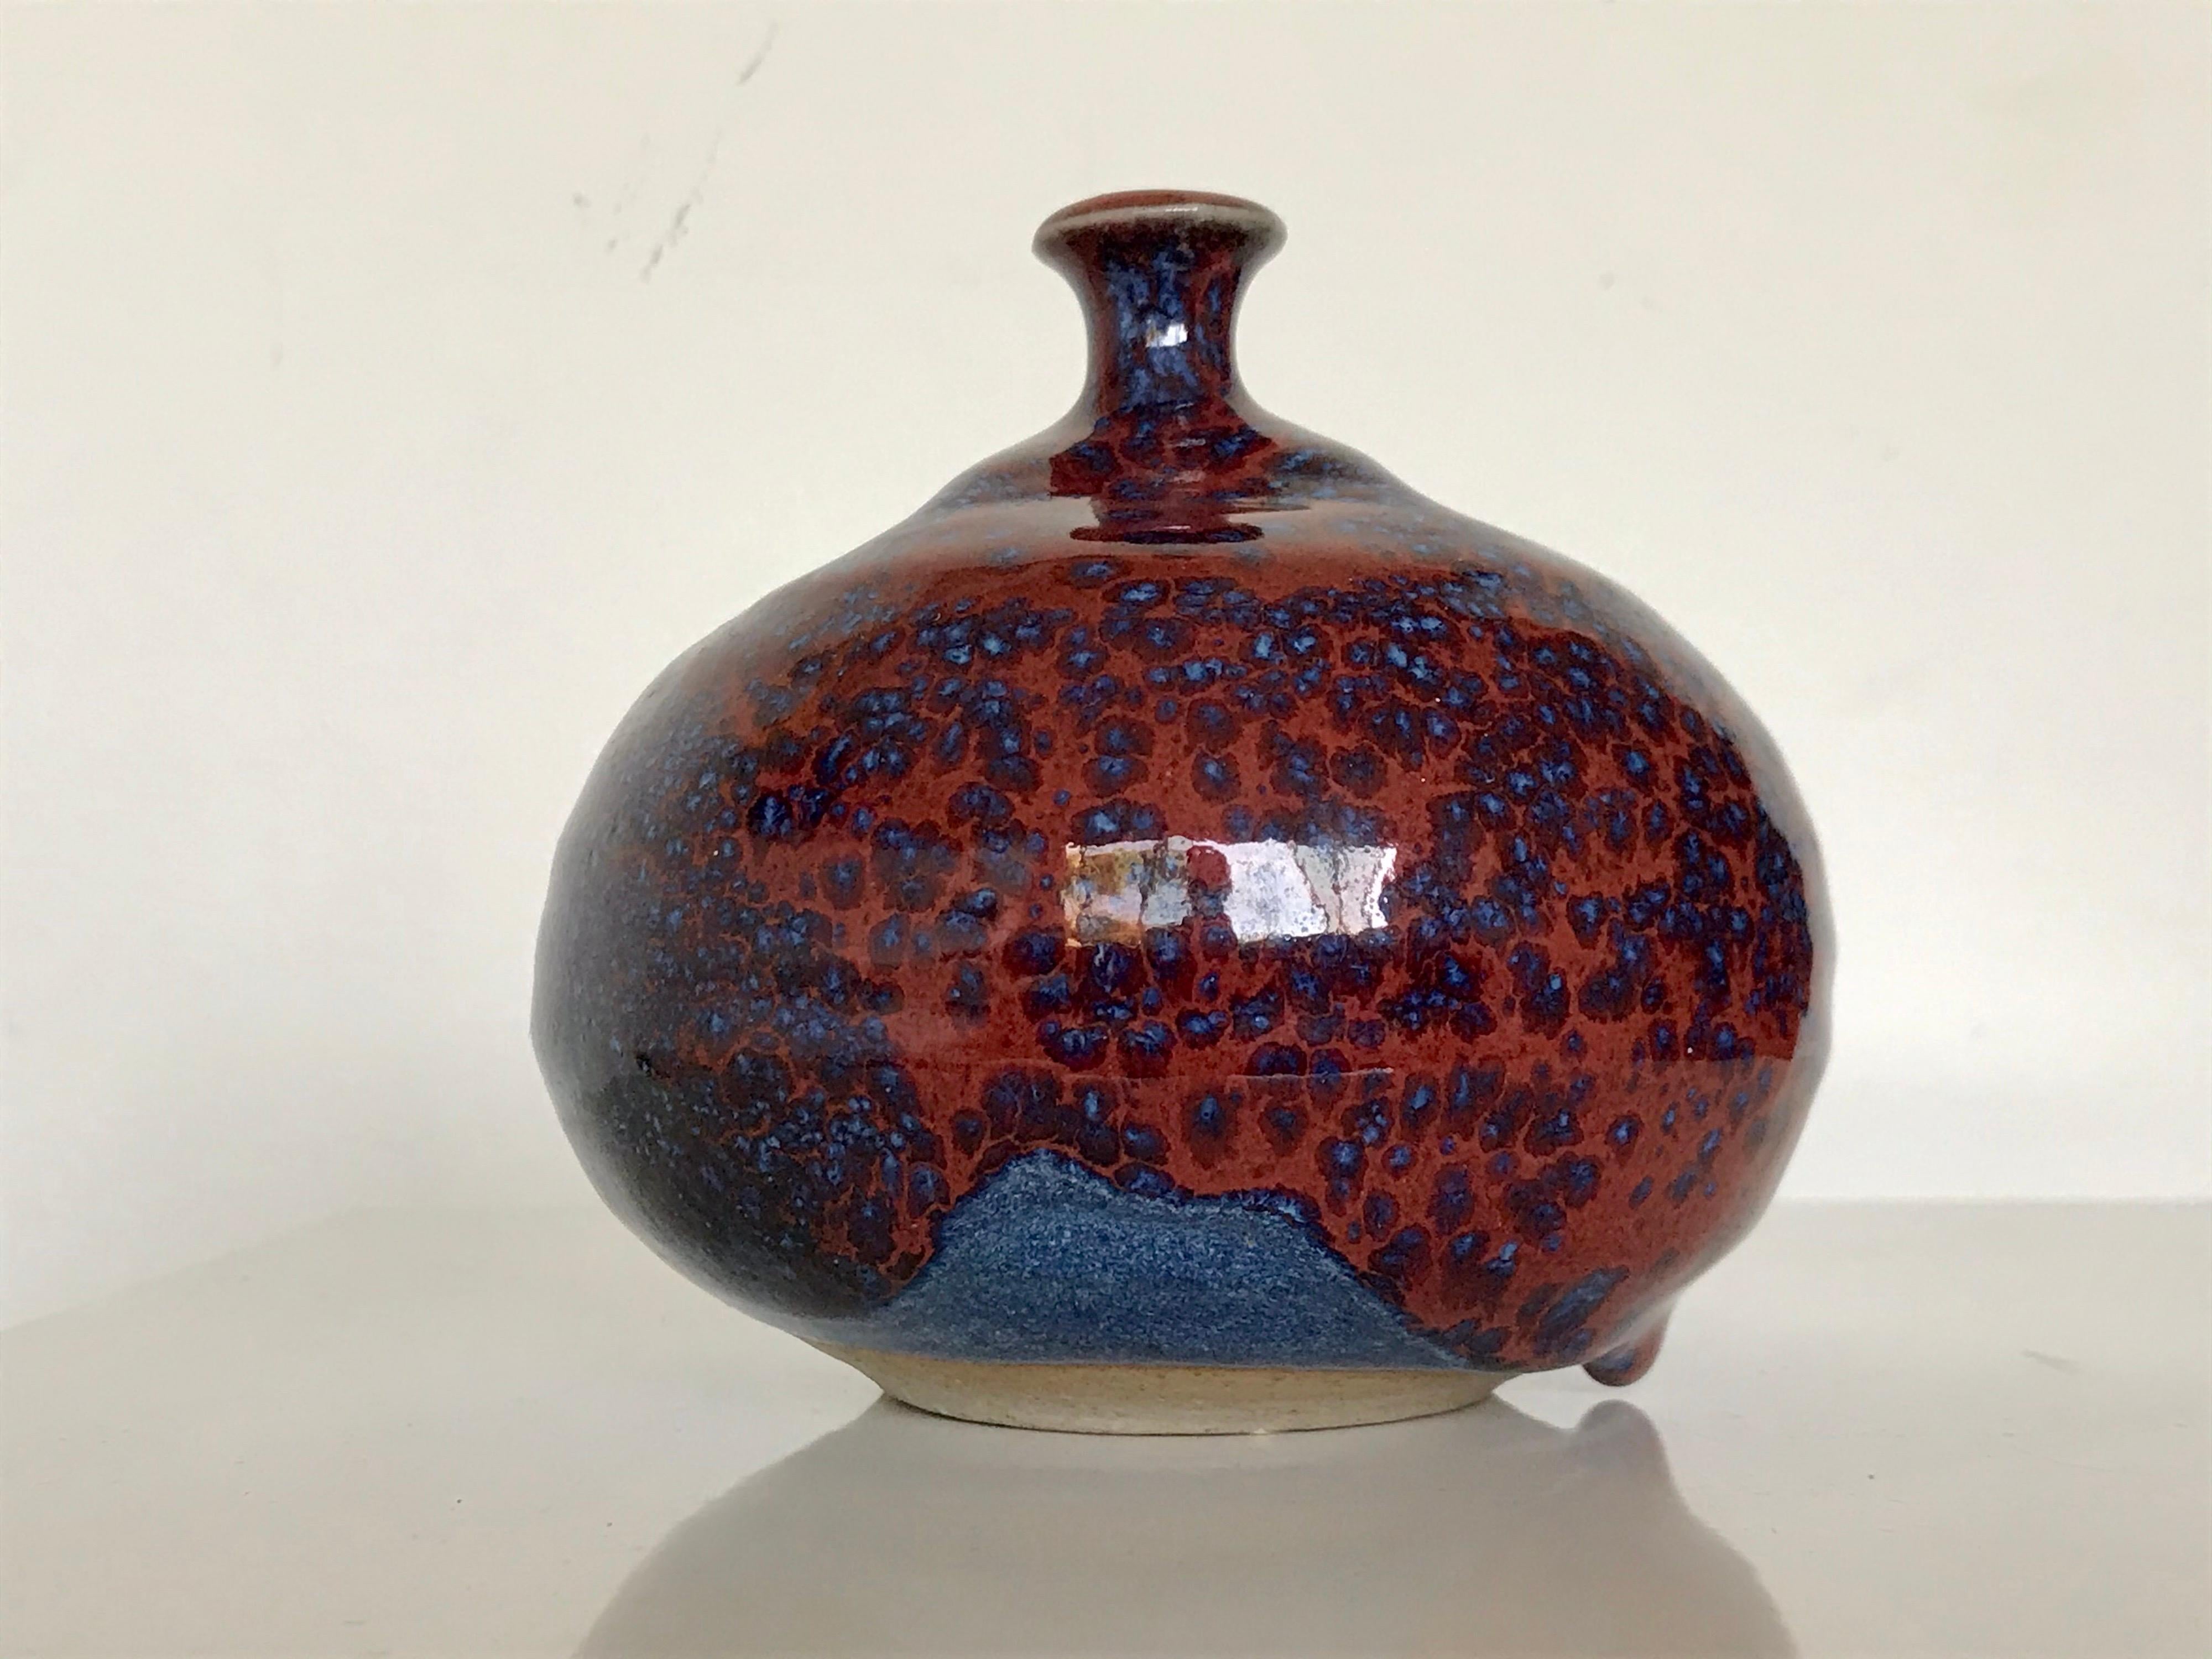 1925 - 2009
American artist, ceramics teacher, author and professor
a rare and wonderful piece of hers to come up for sale
wheel thrown clay with an amazing glaze hue of red and blues with one big glob drip accent
initialed on the bottom